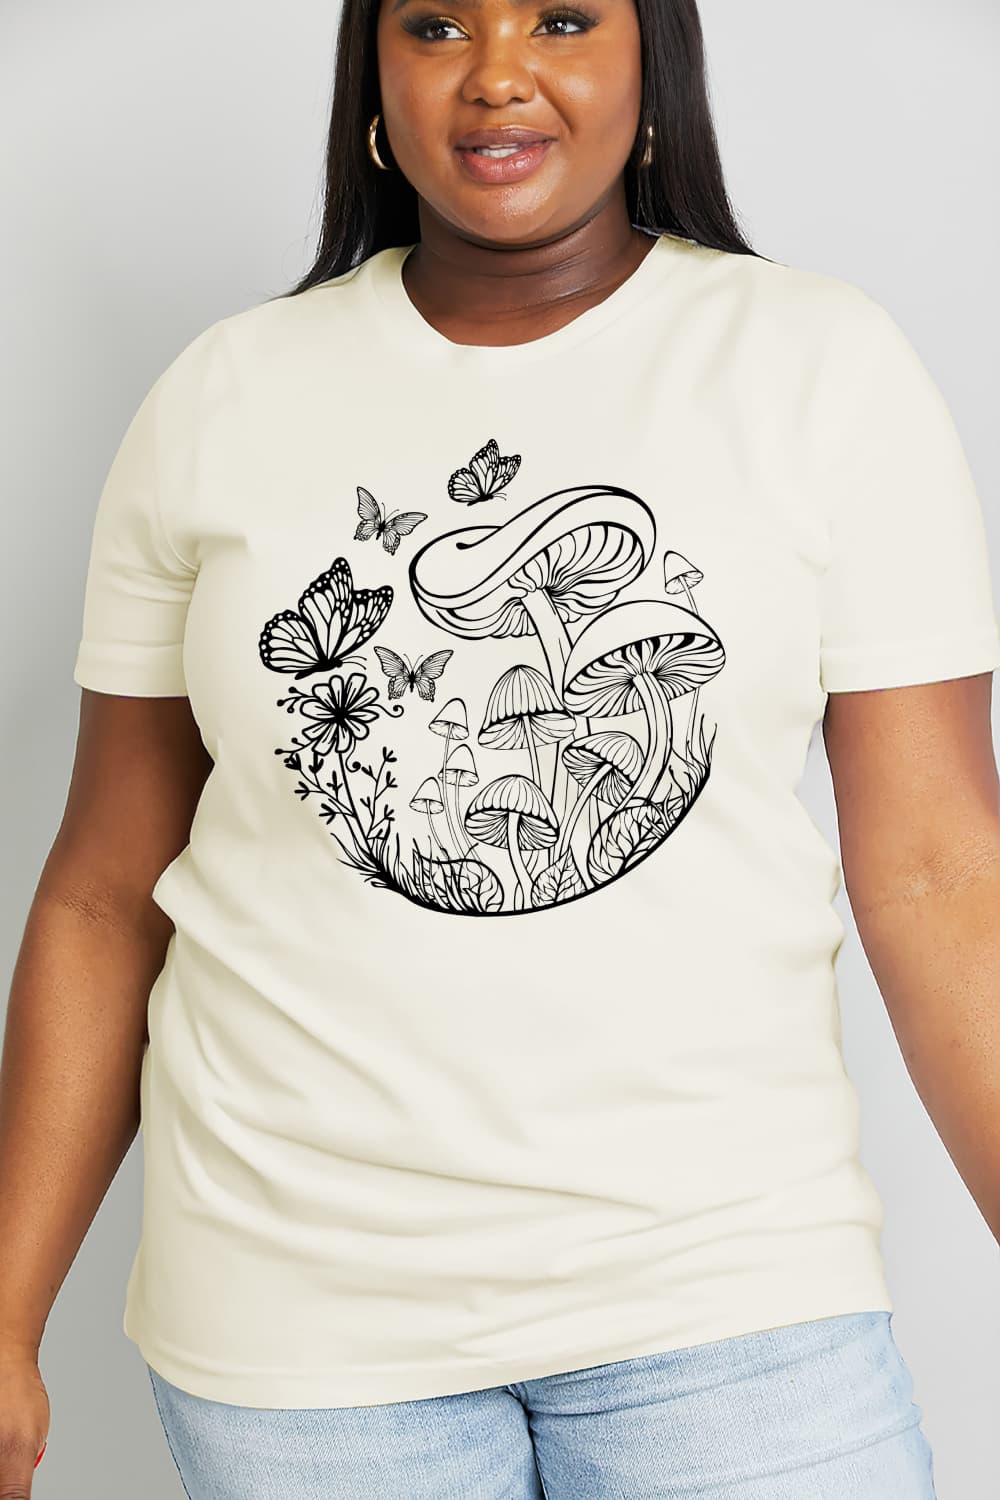 Simply Love Butterfly & Mushroom Graphic Cotton Tee